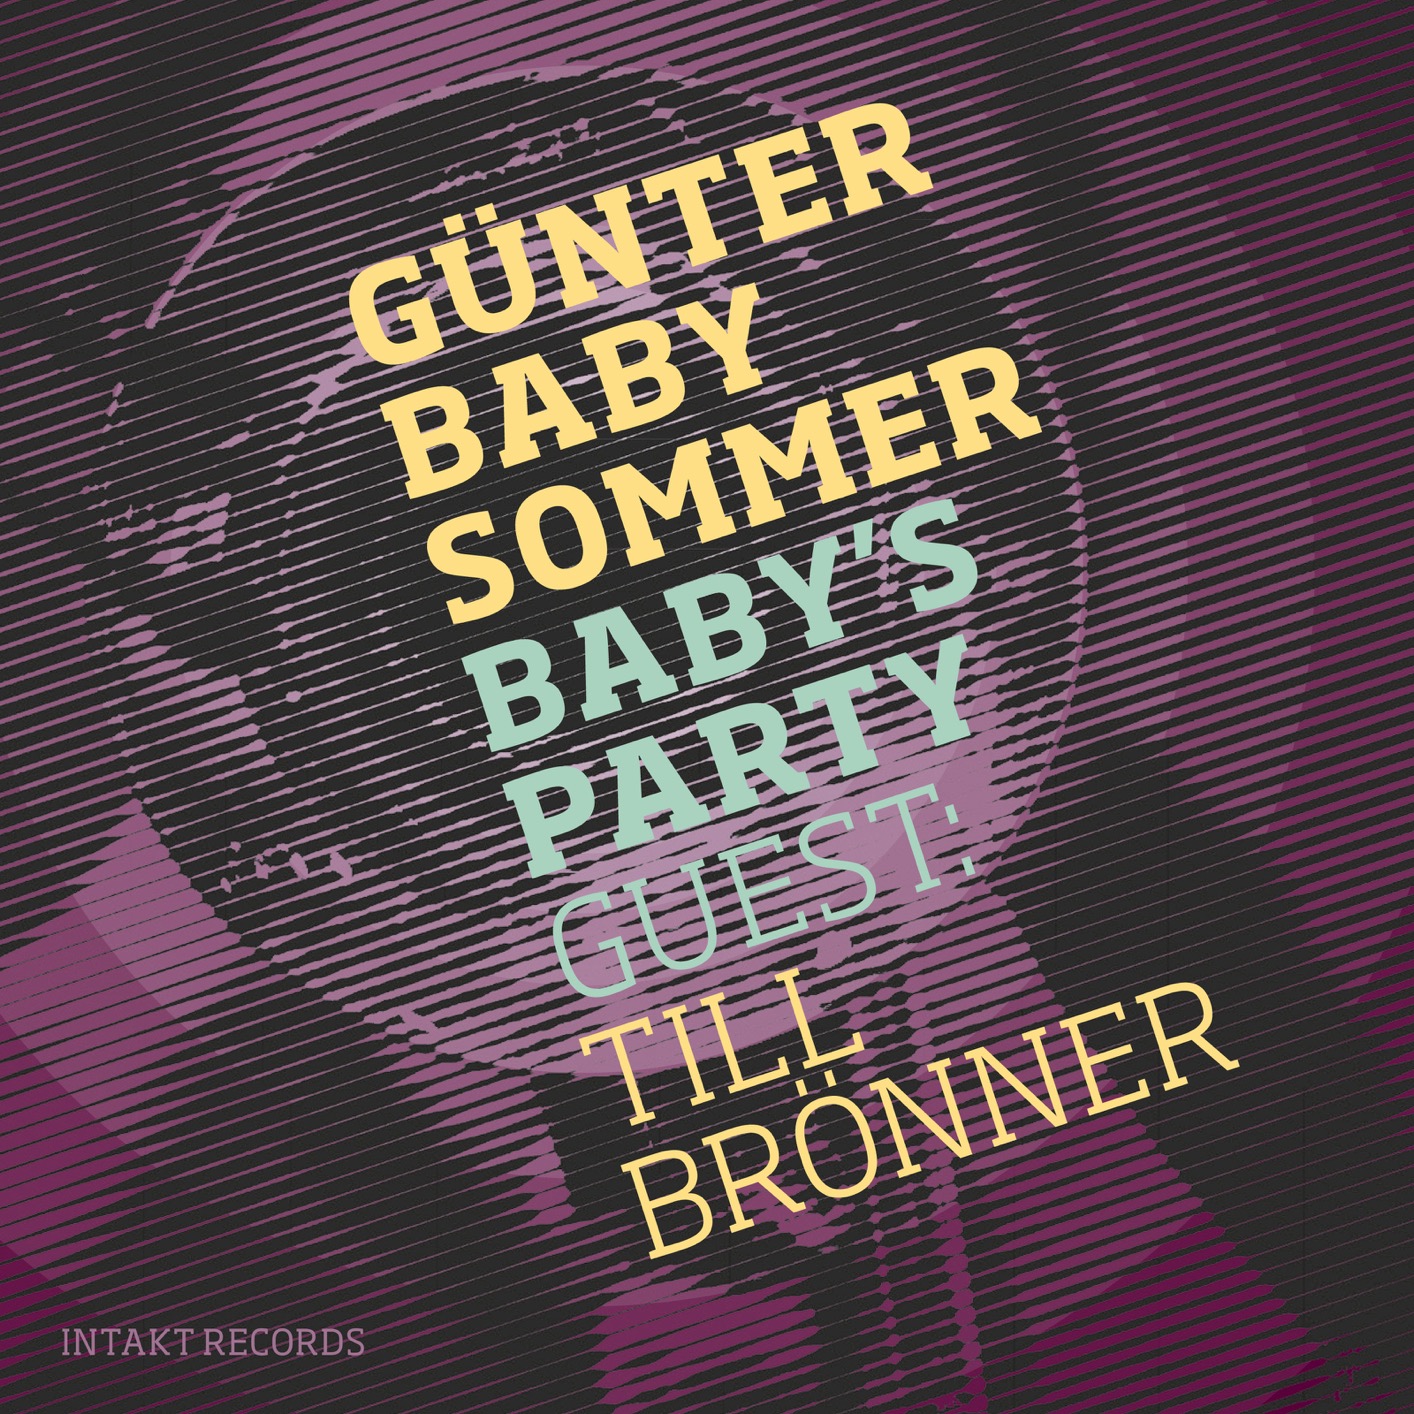 Gunter Sommer - Baby’s Party (with guest Till Bronner) (2018) [FLAC 24bit/88,2kHz]